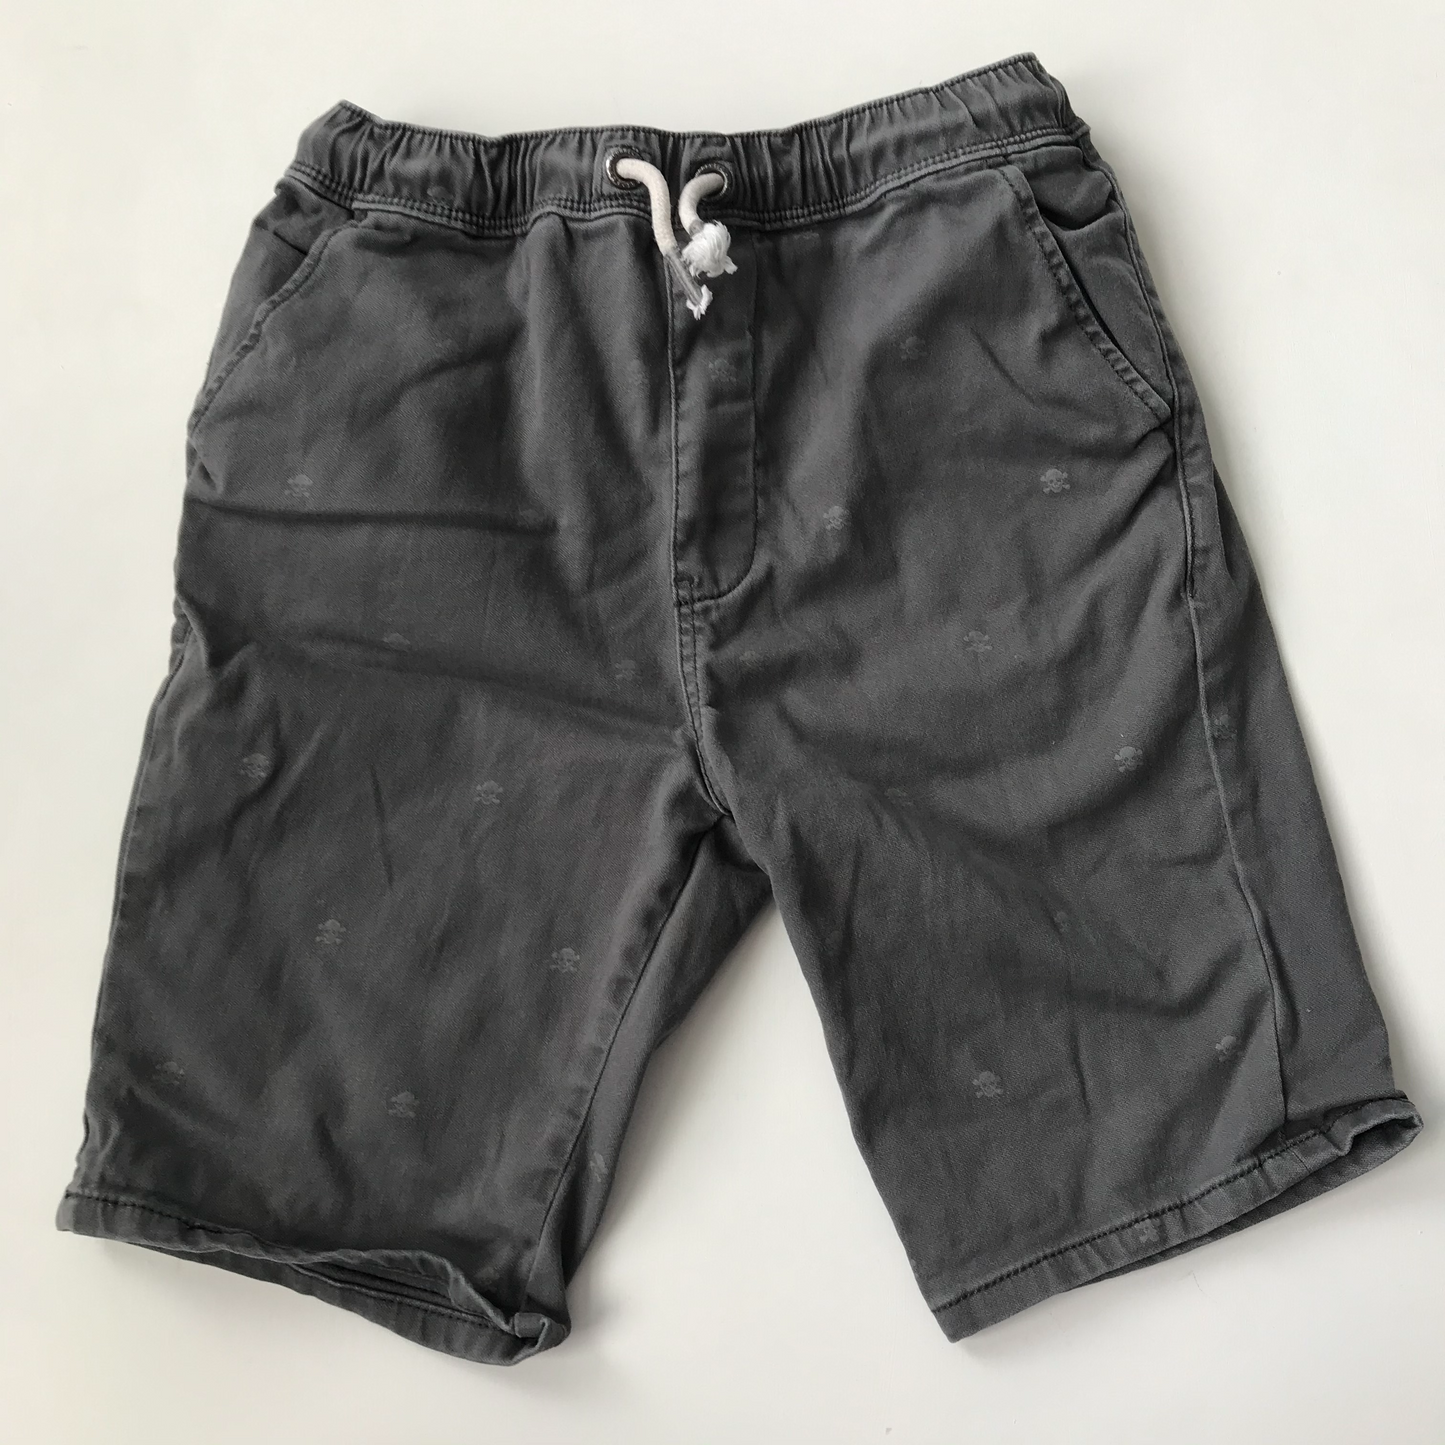 Shorts - NEXT with Skull Details - Age 11